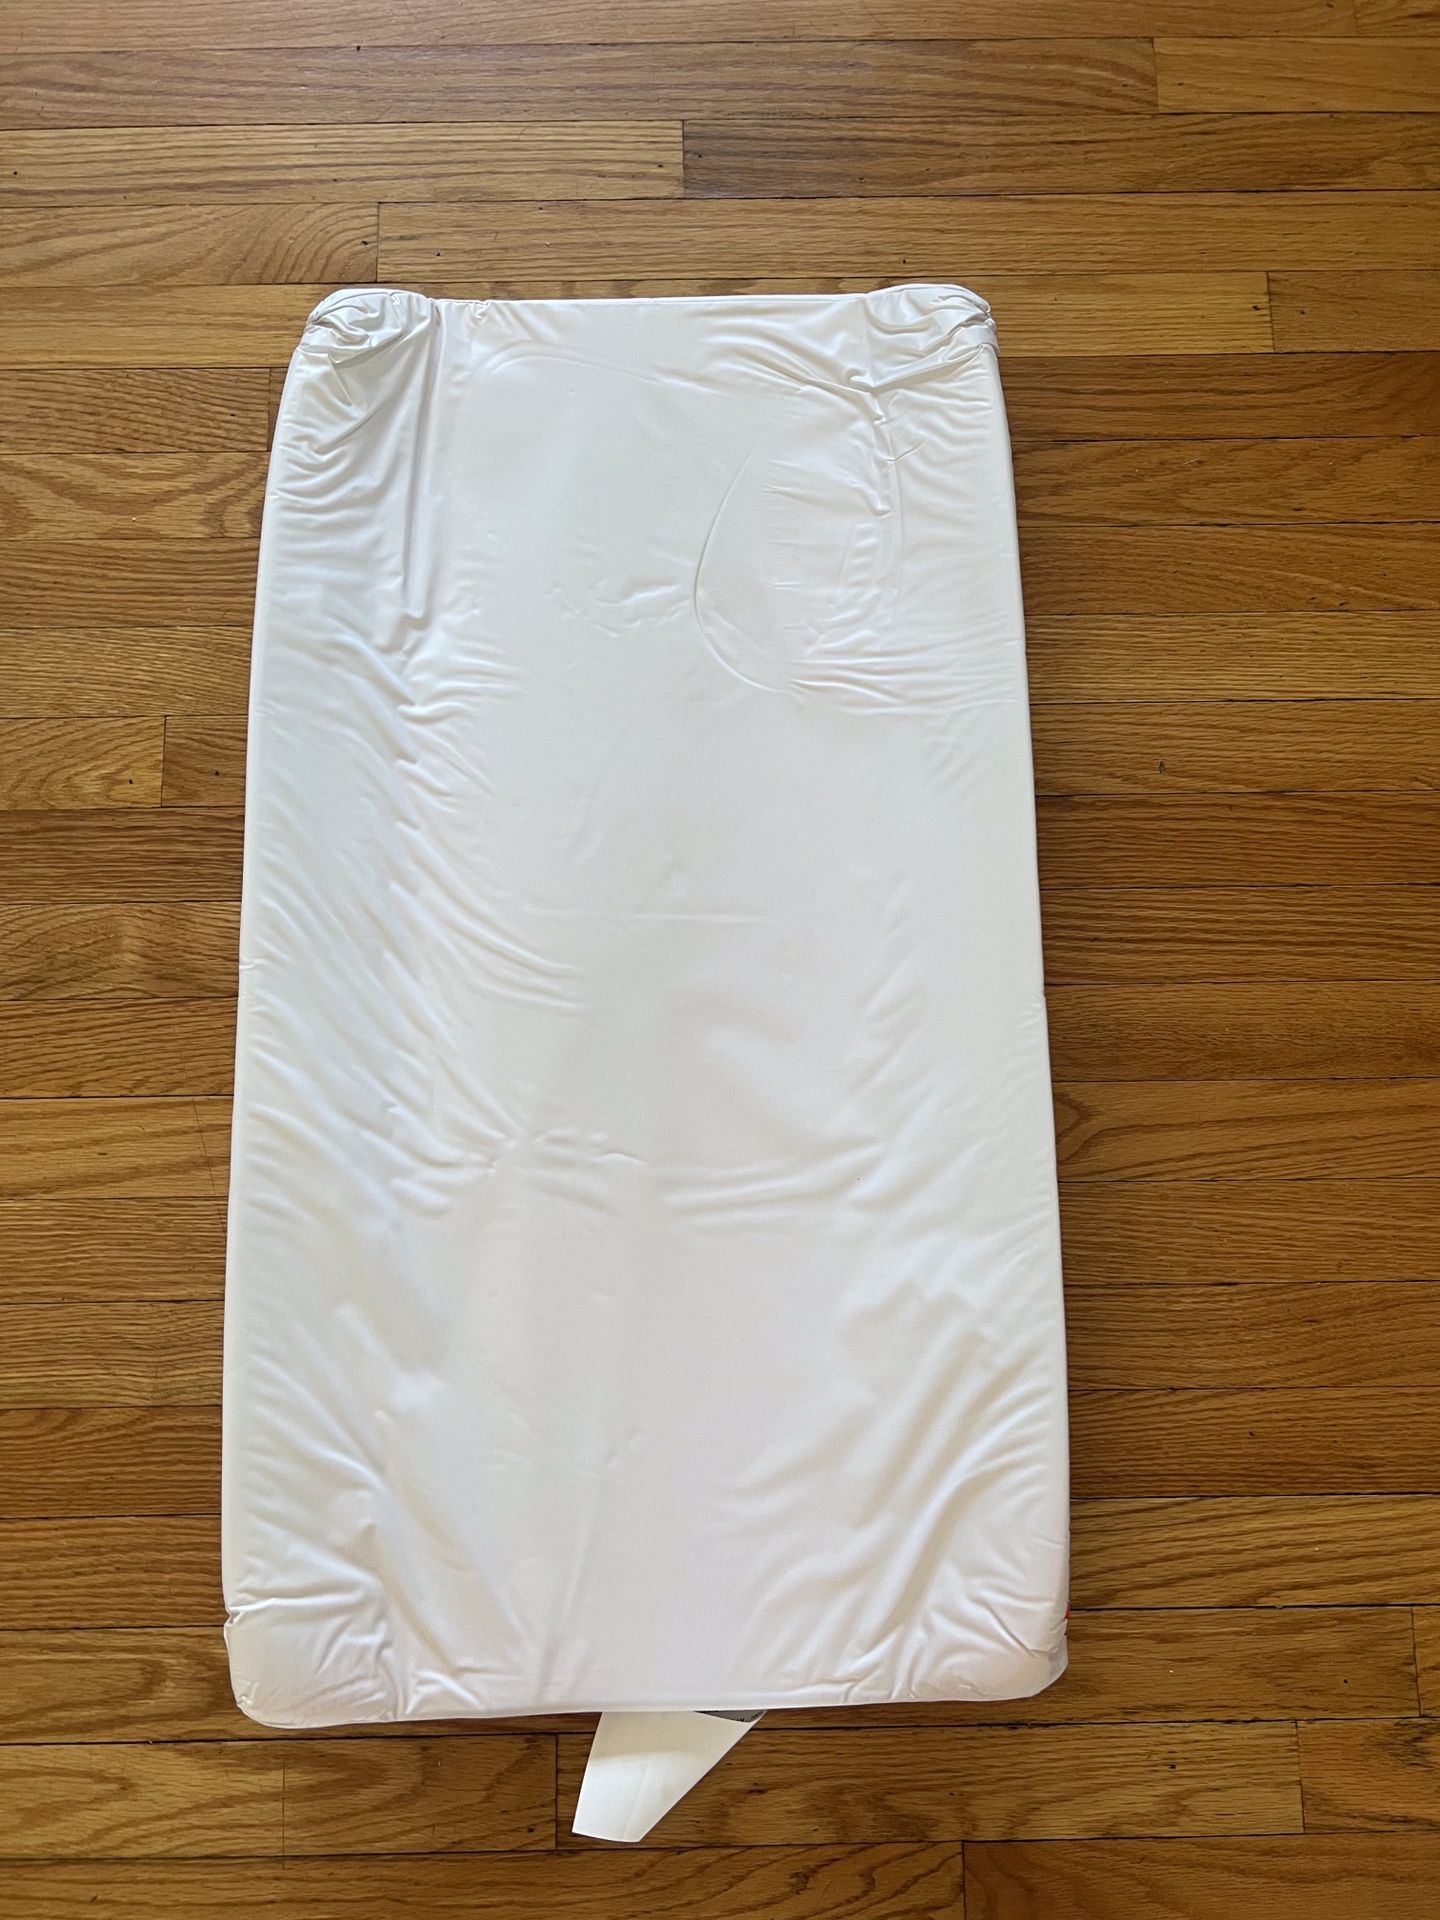 Baby Changing Pad For Changing Table